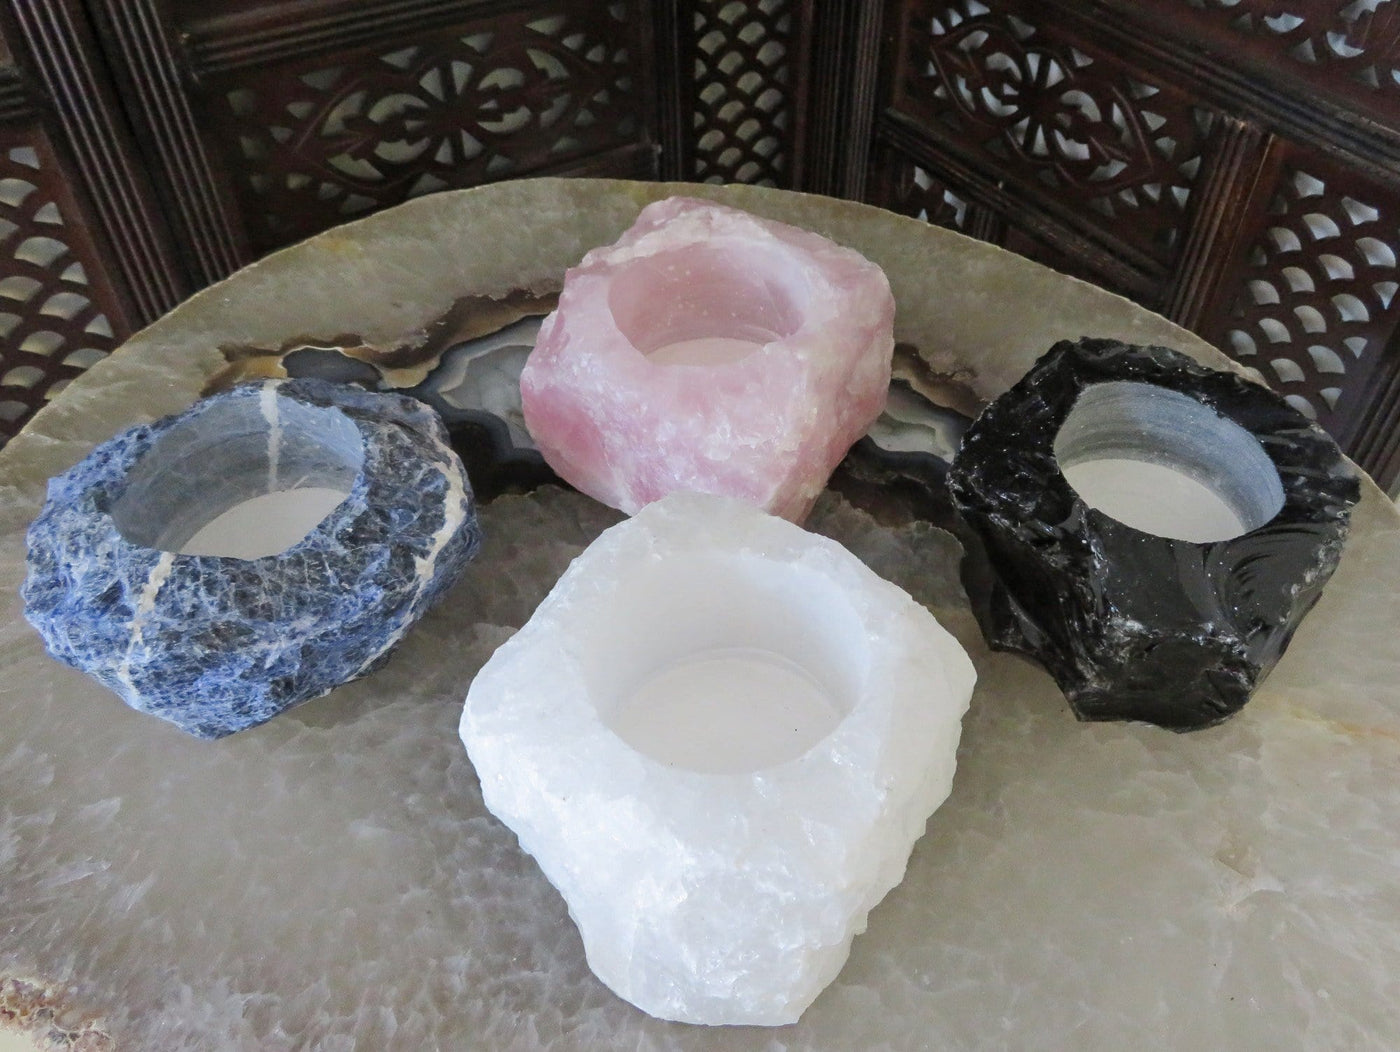 4 Rough Stone Planters of different crystals on top of crystal table top